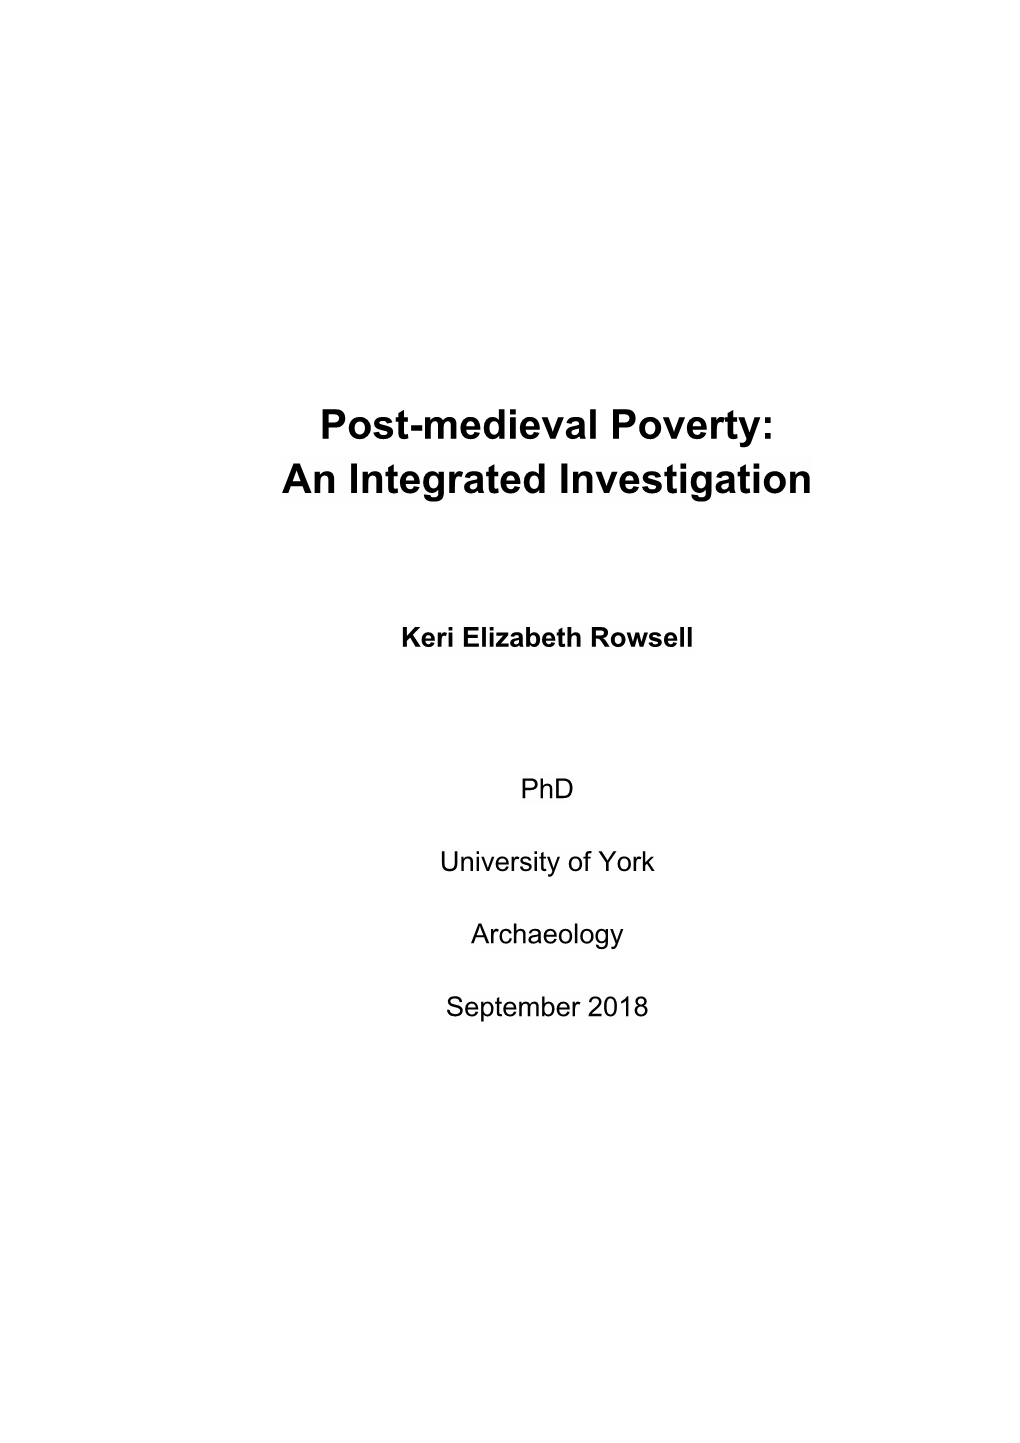 Post-Medieval Poverty: an Integrated Investigation